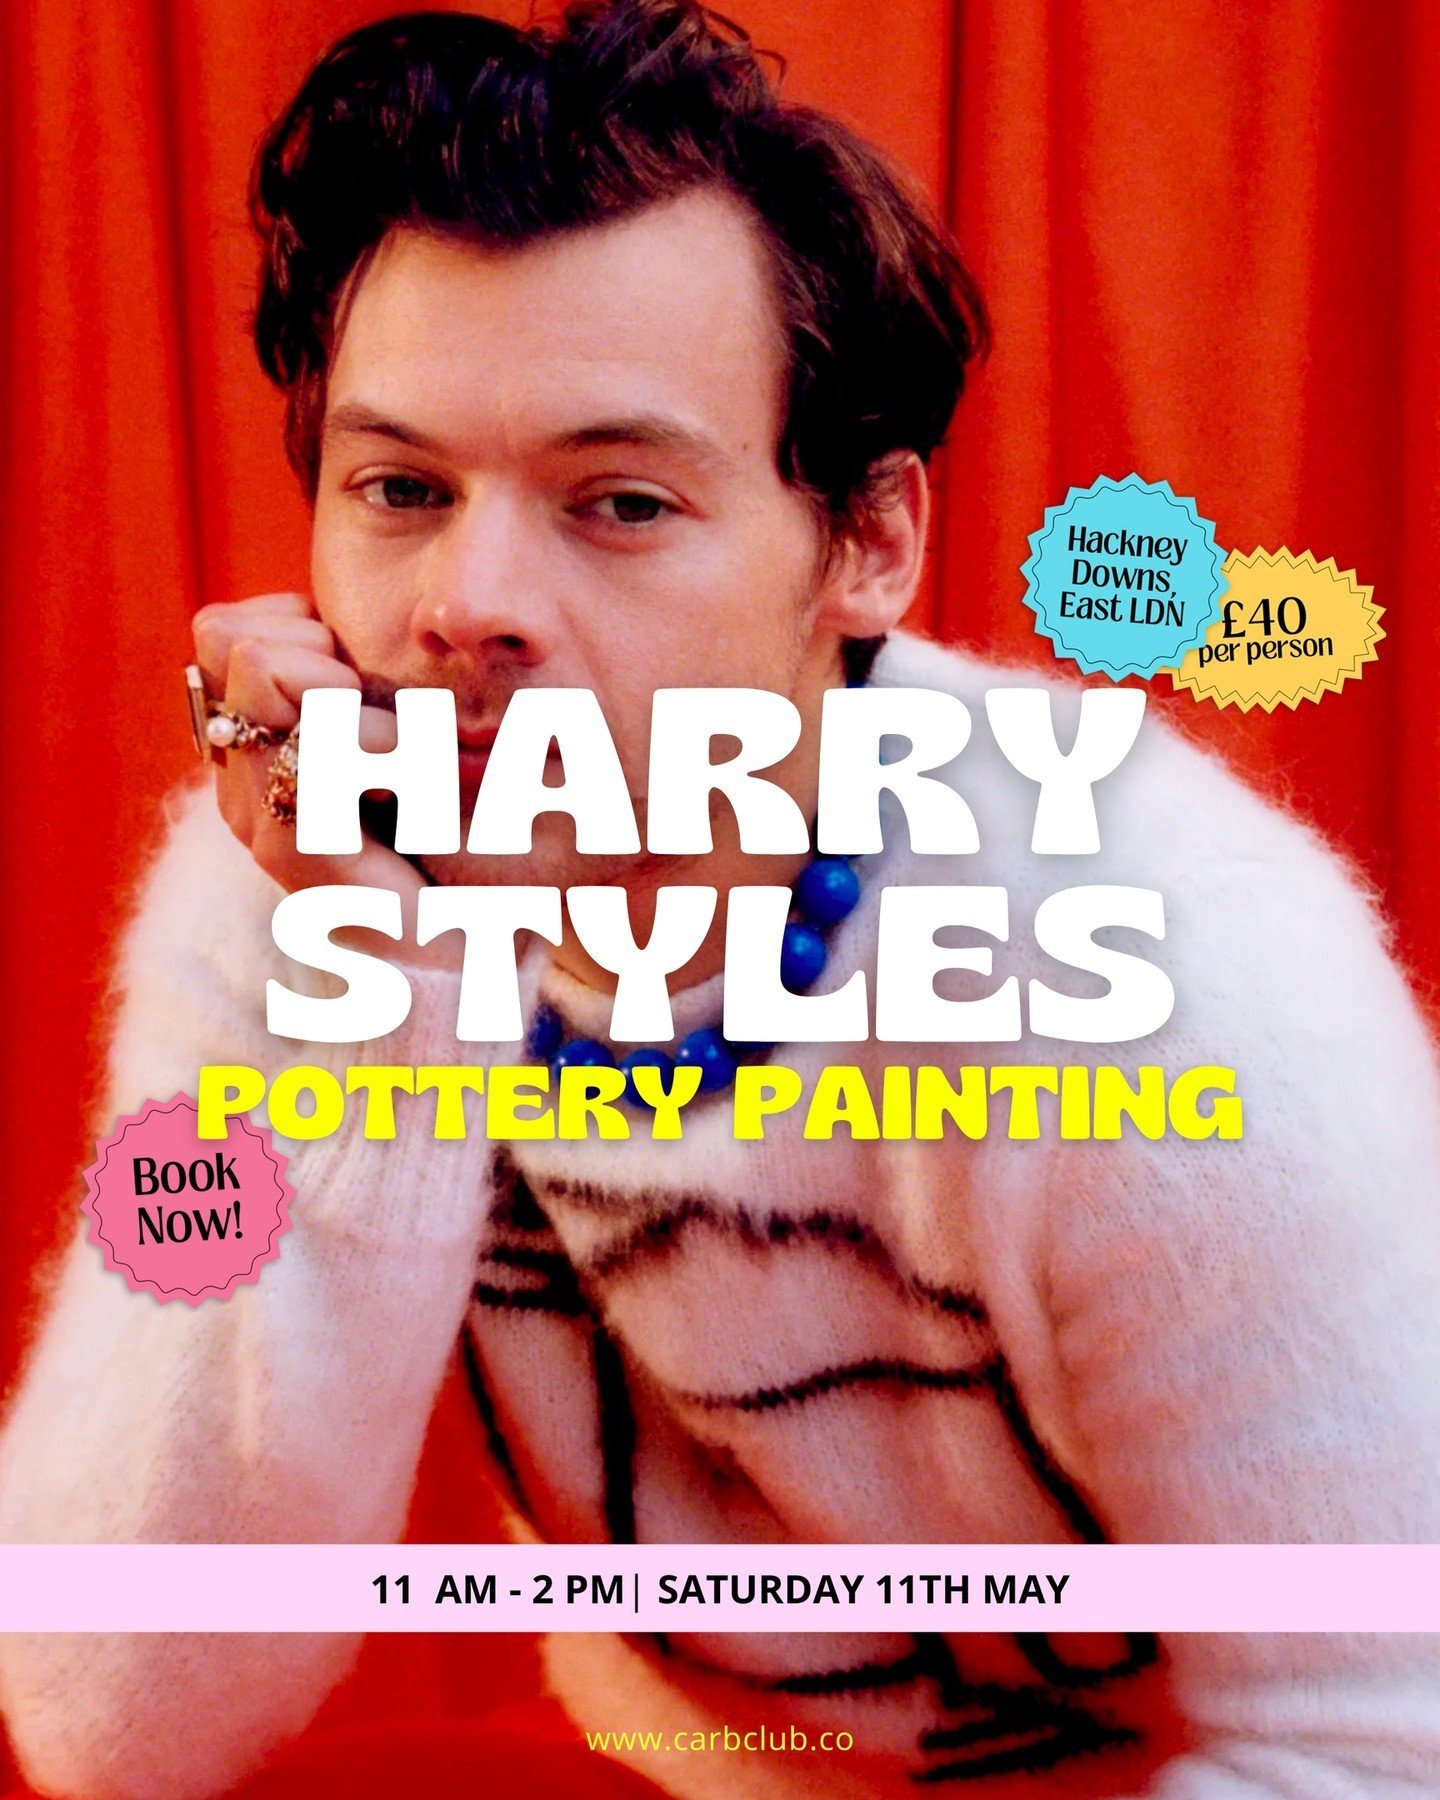 11 AM - 2 PM SATURDAY 11TH MAY ⁠
⁠
Paint Your Own Pieces but make it Harry Styles themed 💅⁠
⁠
We will be playing all of Harry Styles&rsquo; albums in full while you get your creative juices flowing by pottery painting in our vibey East London studio